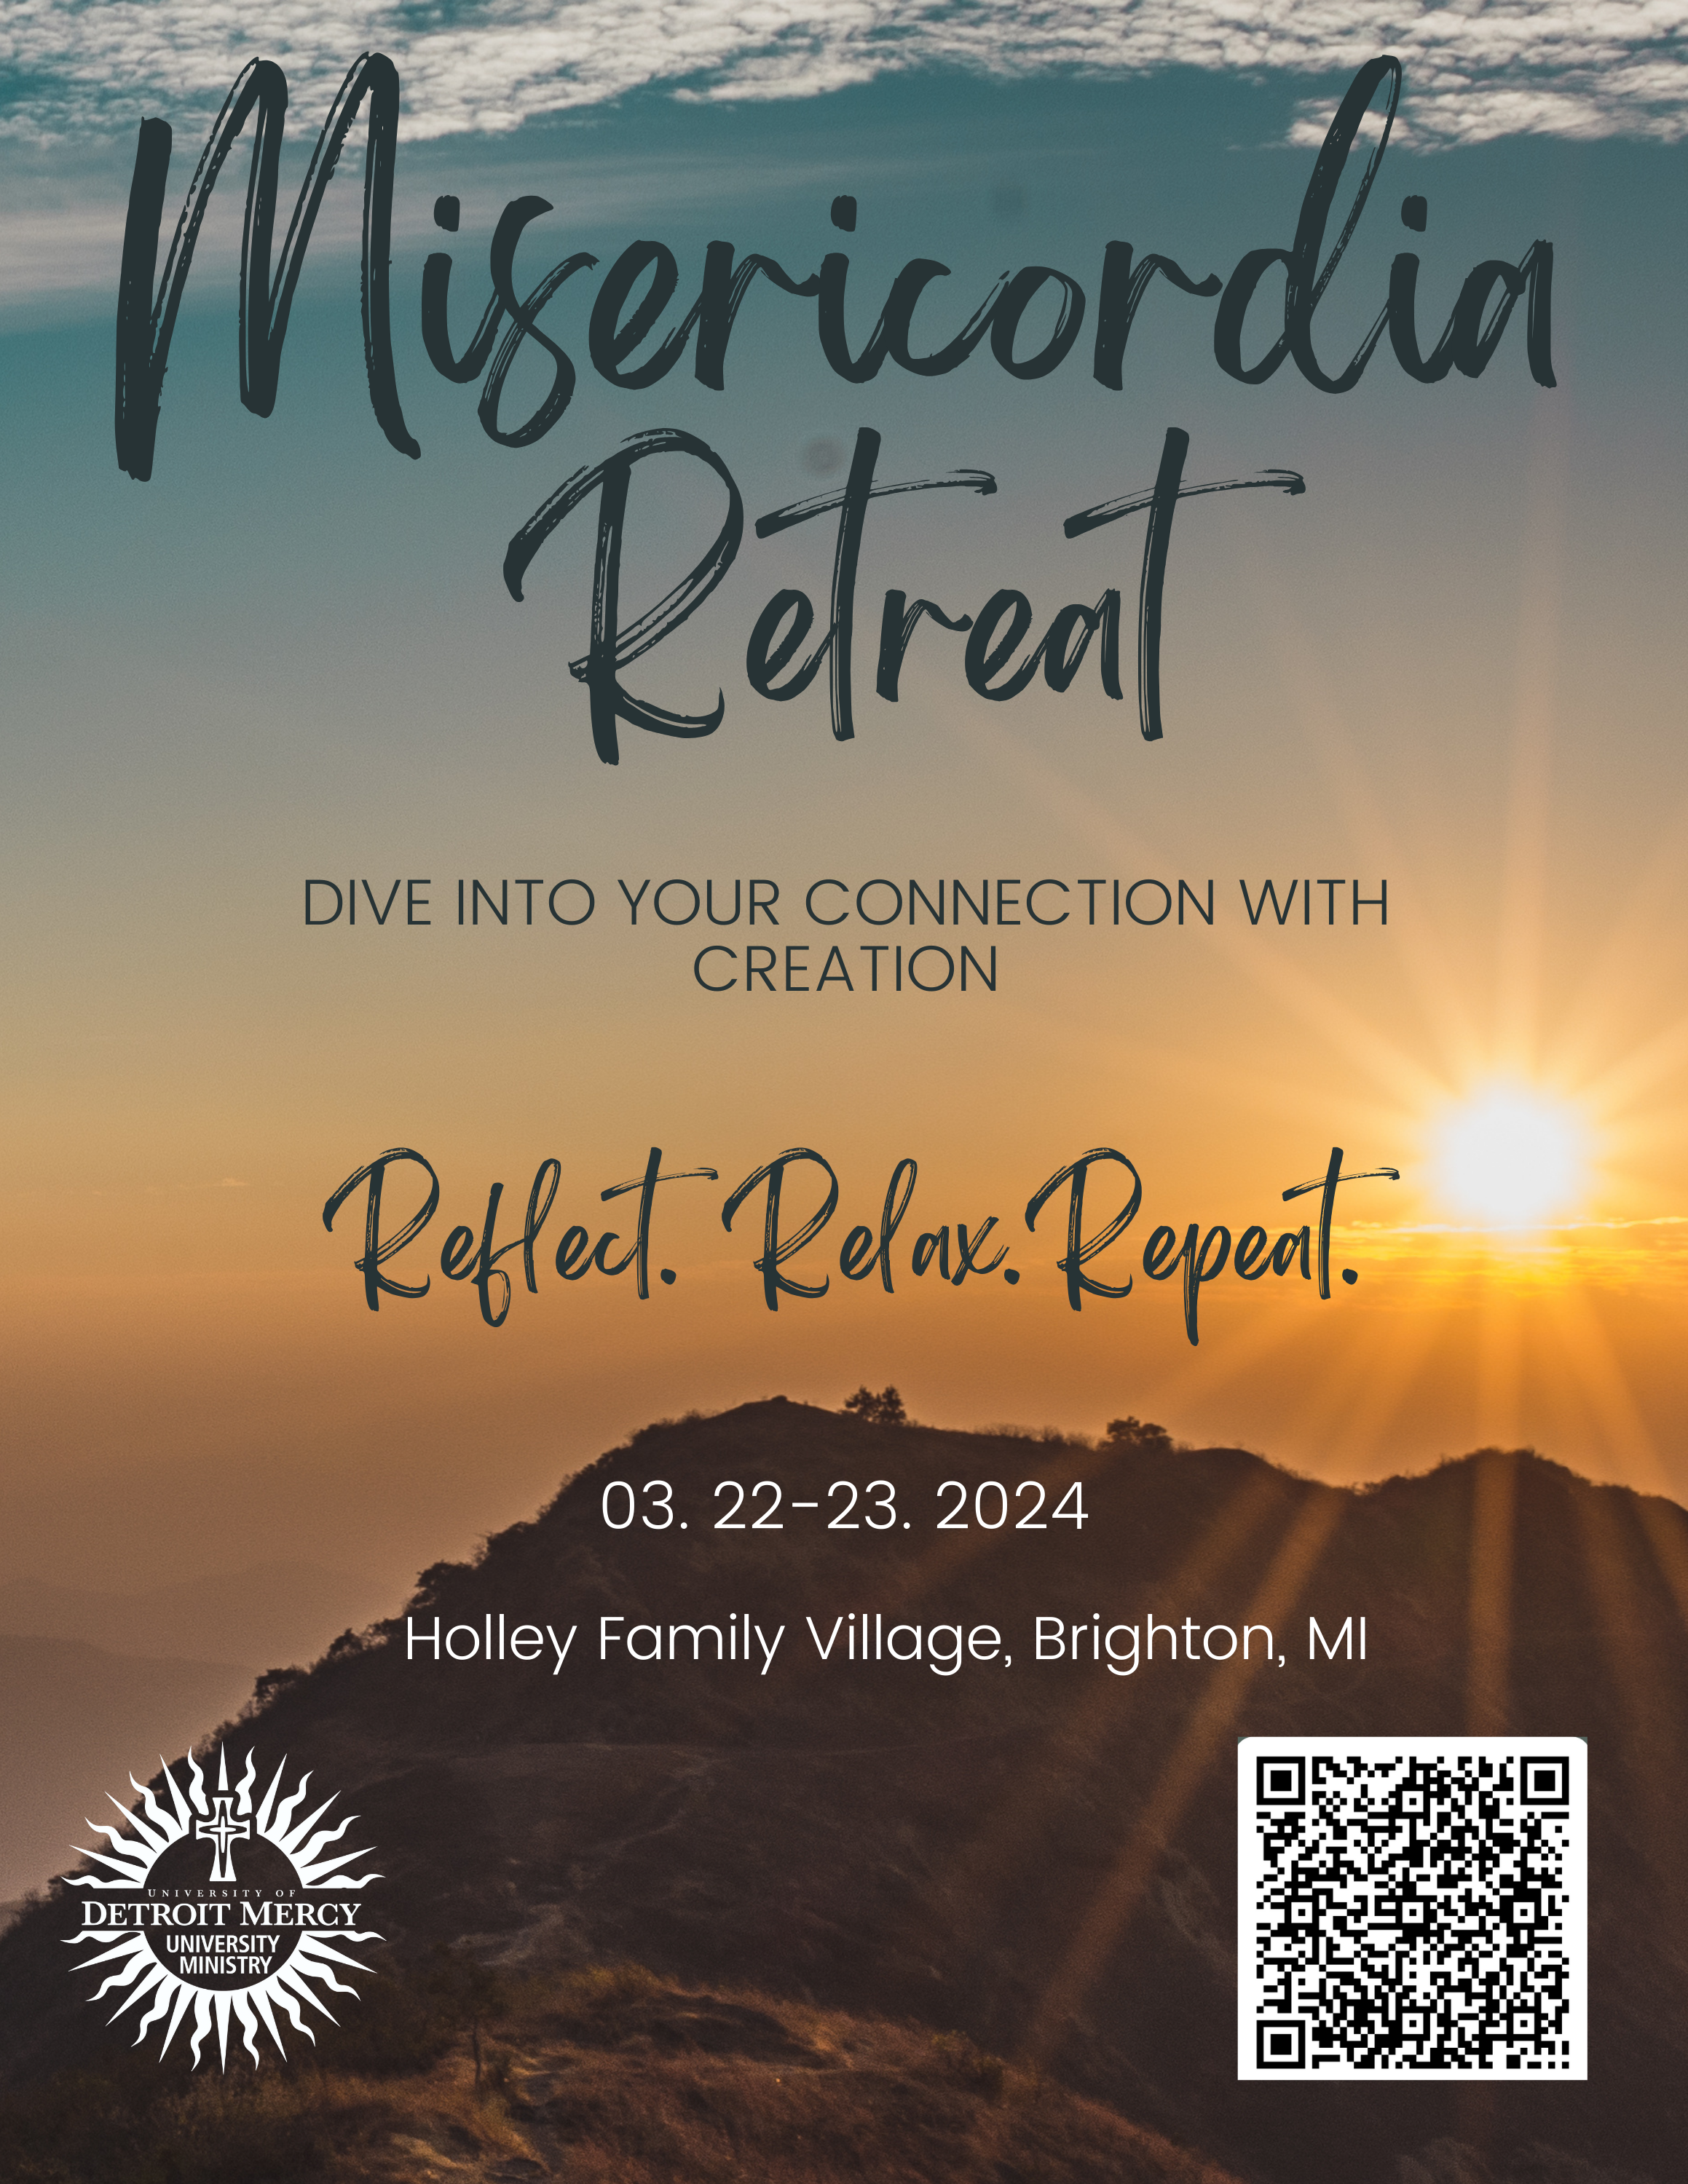 Flyer with retreat info and sunrise background